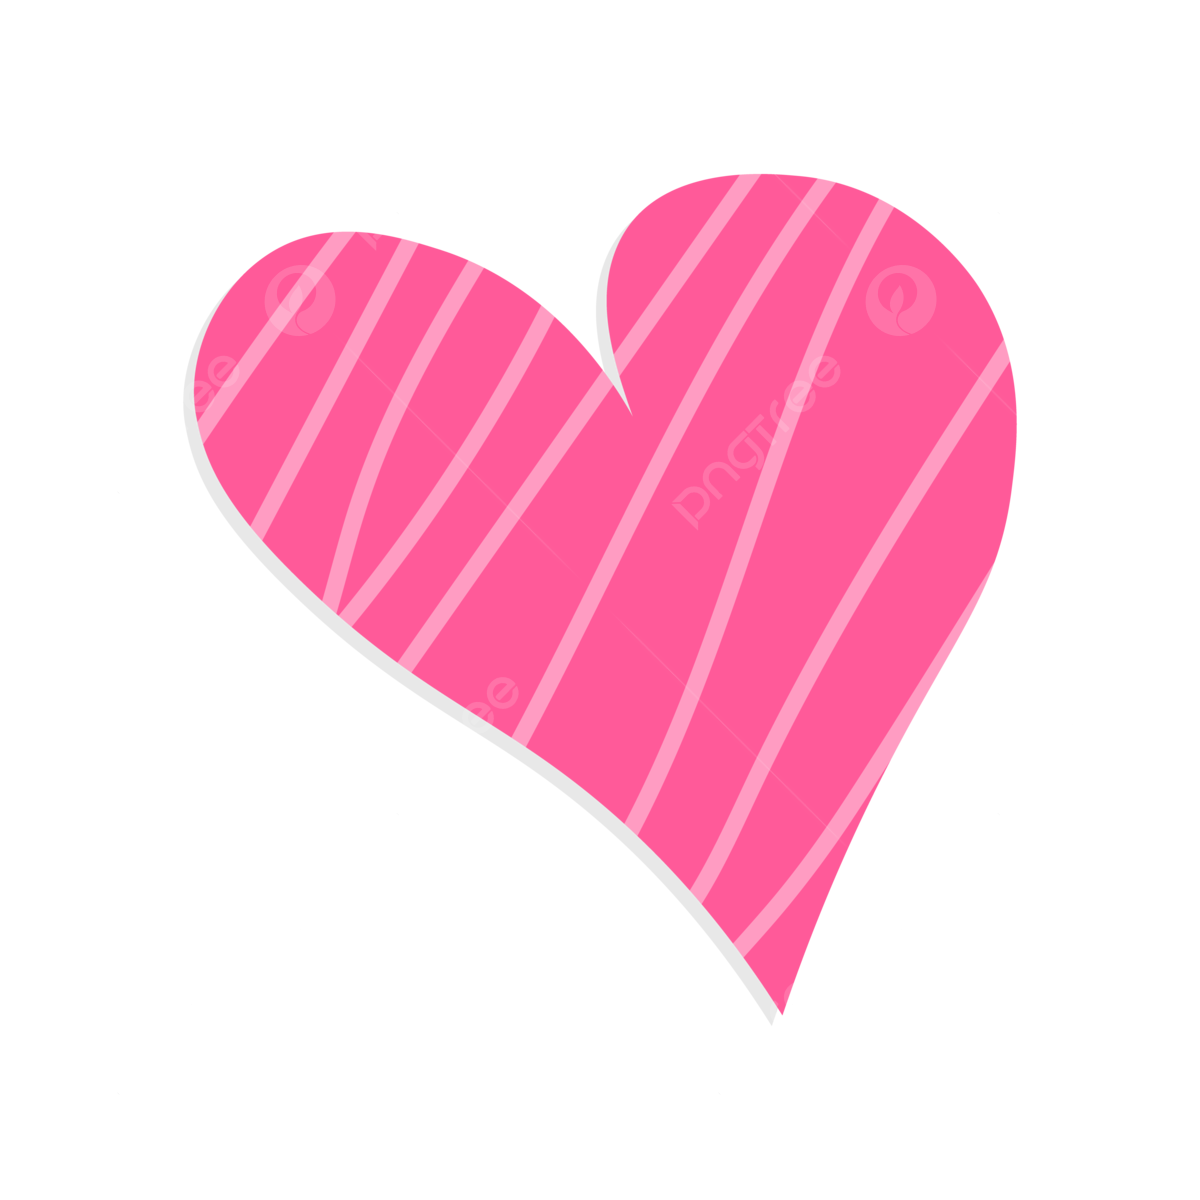 Aesthetic Heart PNG HD Image